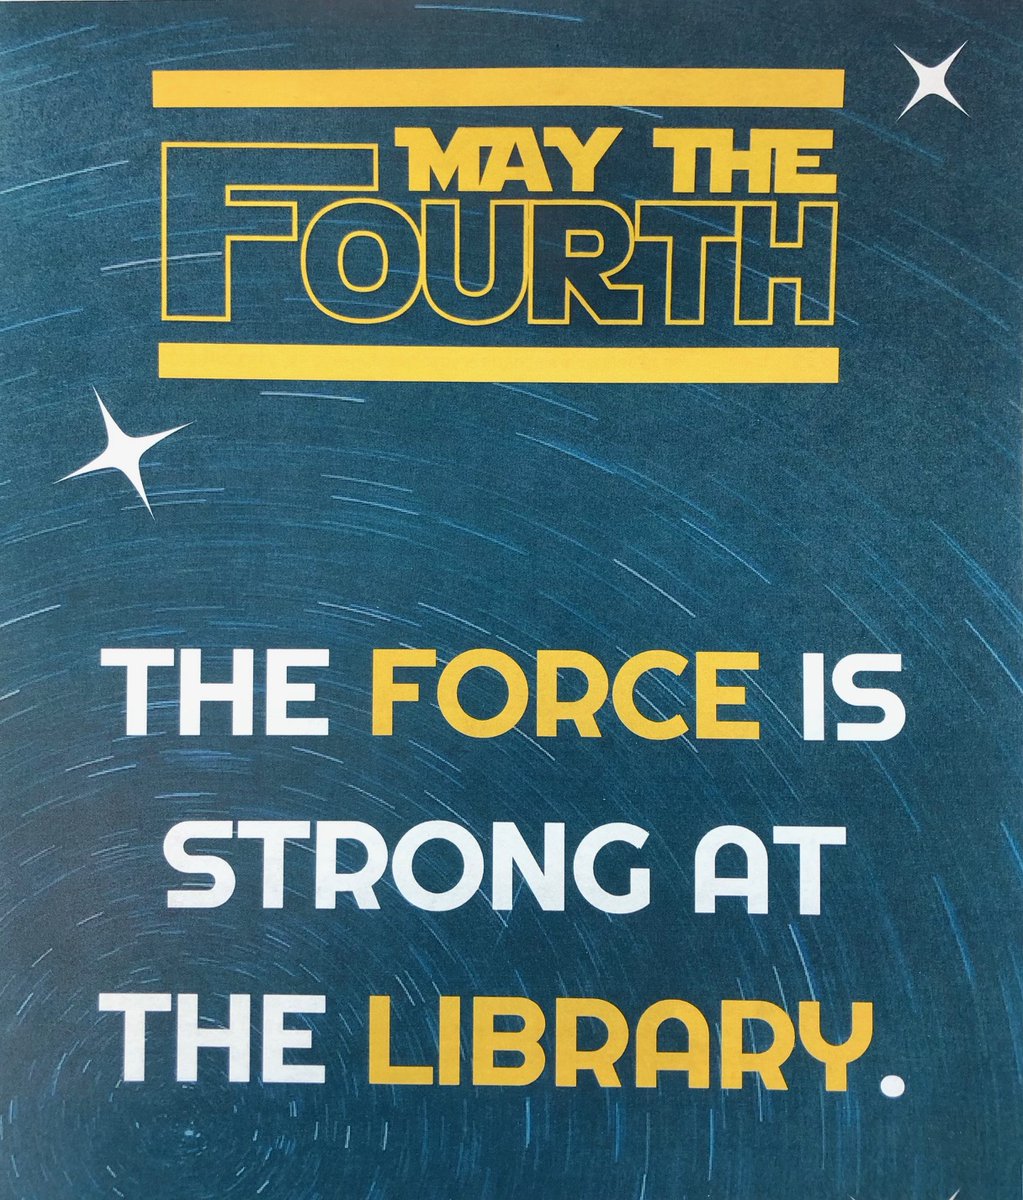 May the 4th be with you!⁠
⁠
#ArcadiaPublicLibrary #Starwars #Maythe4thbewithyou